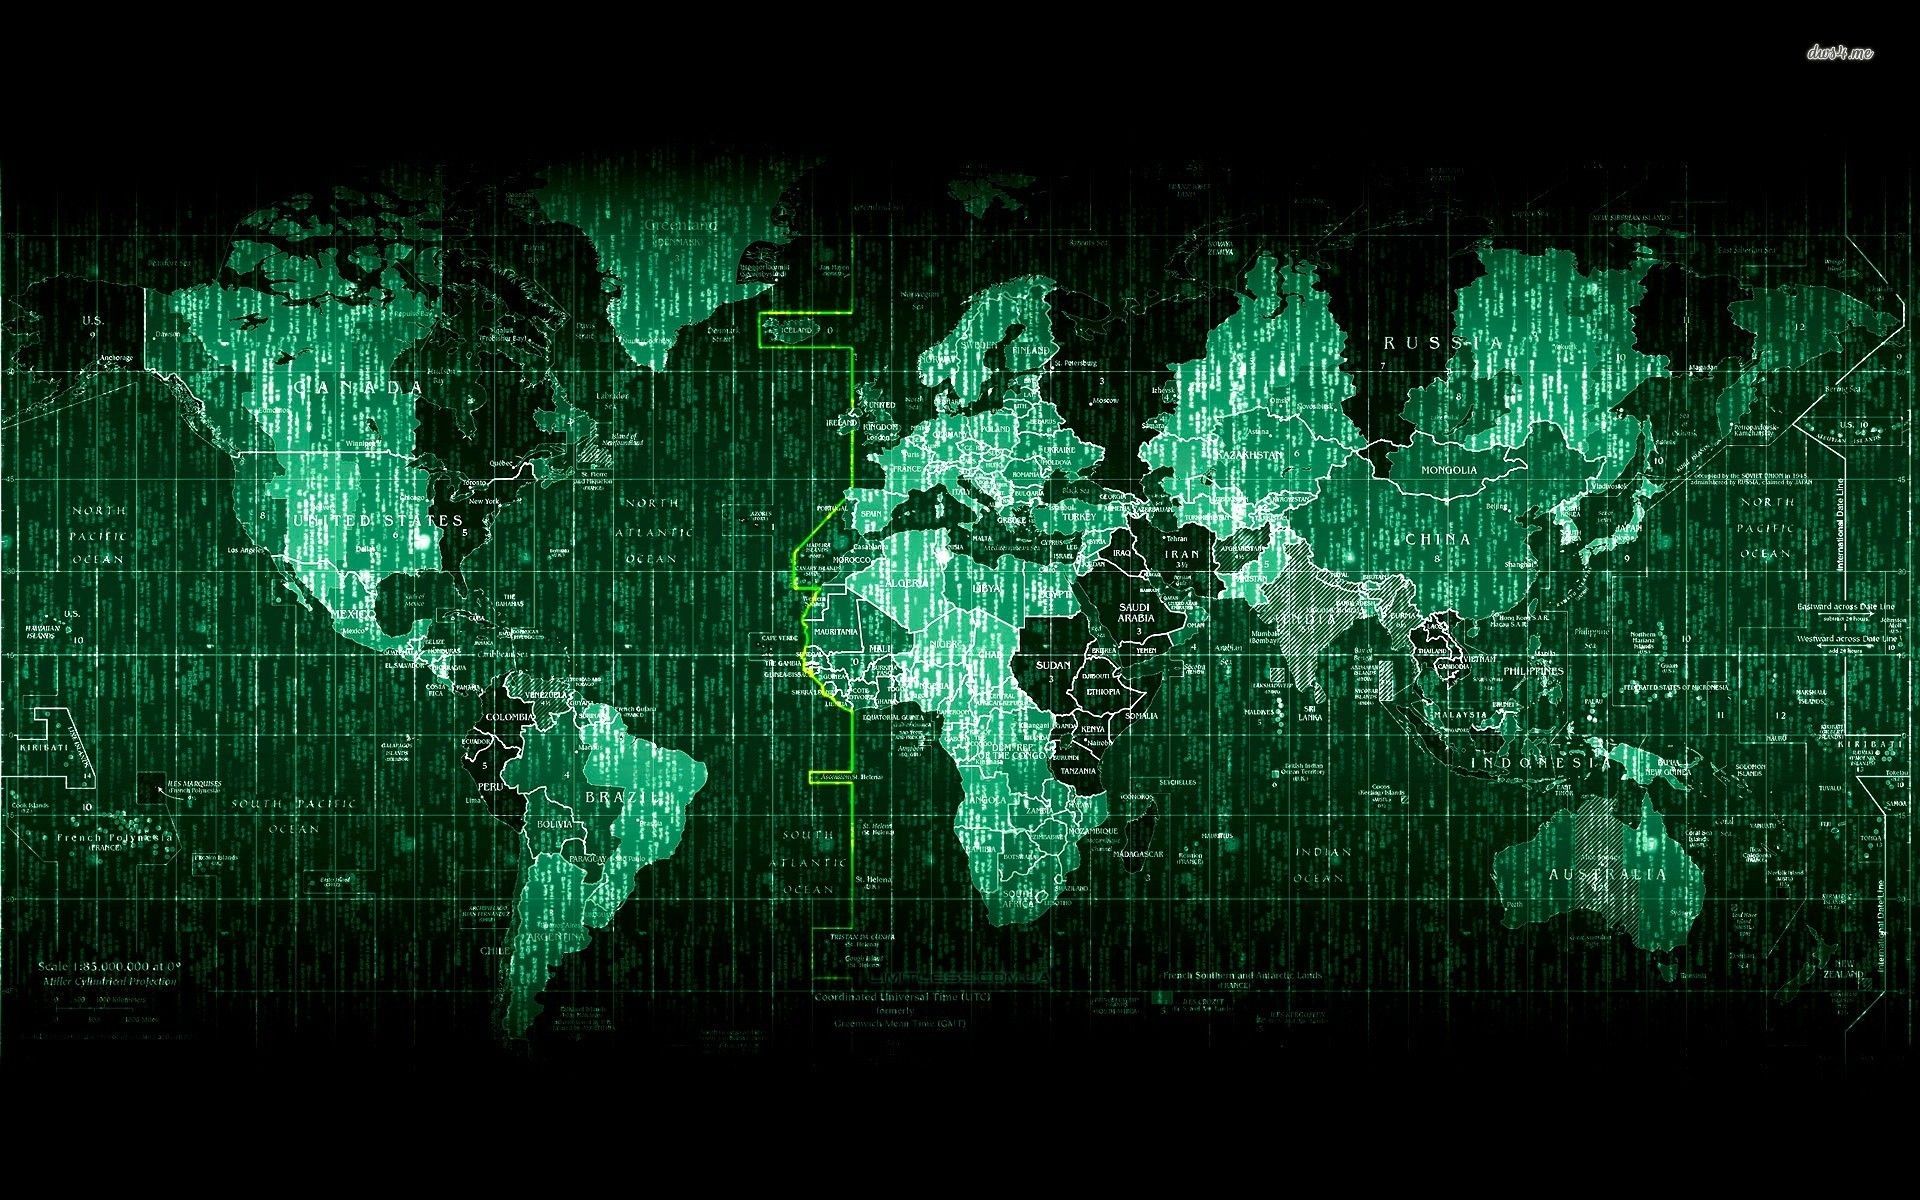 Digital Green Wallpaper High Quality For Free Wallpaper. World map wallpaper, Map wallpaper, Code wallpaper